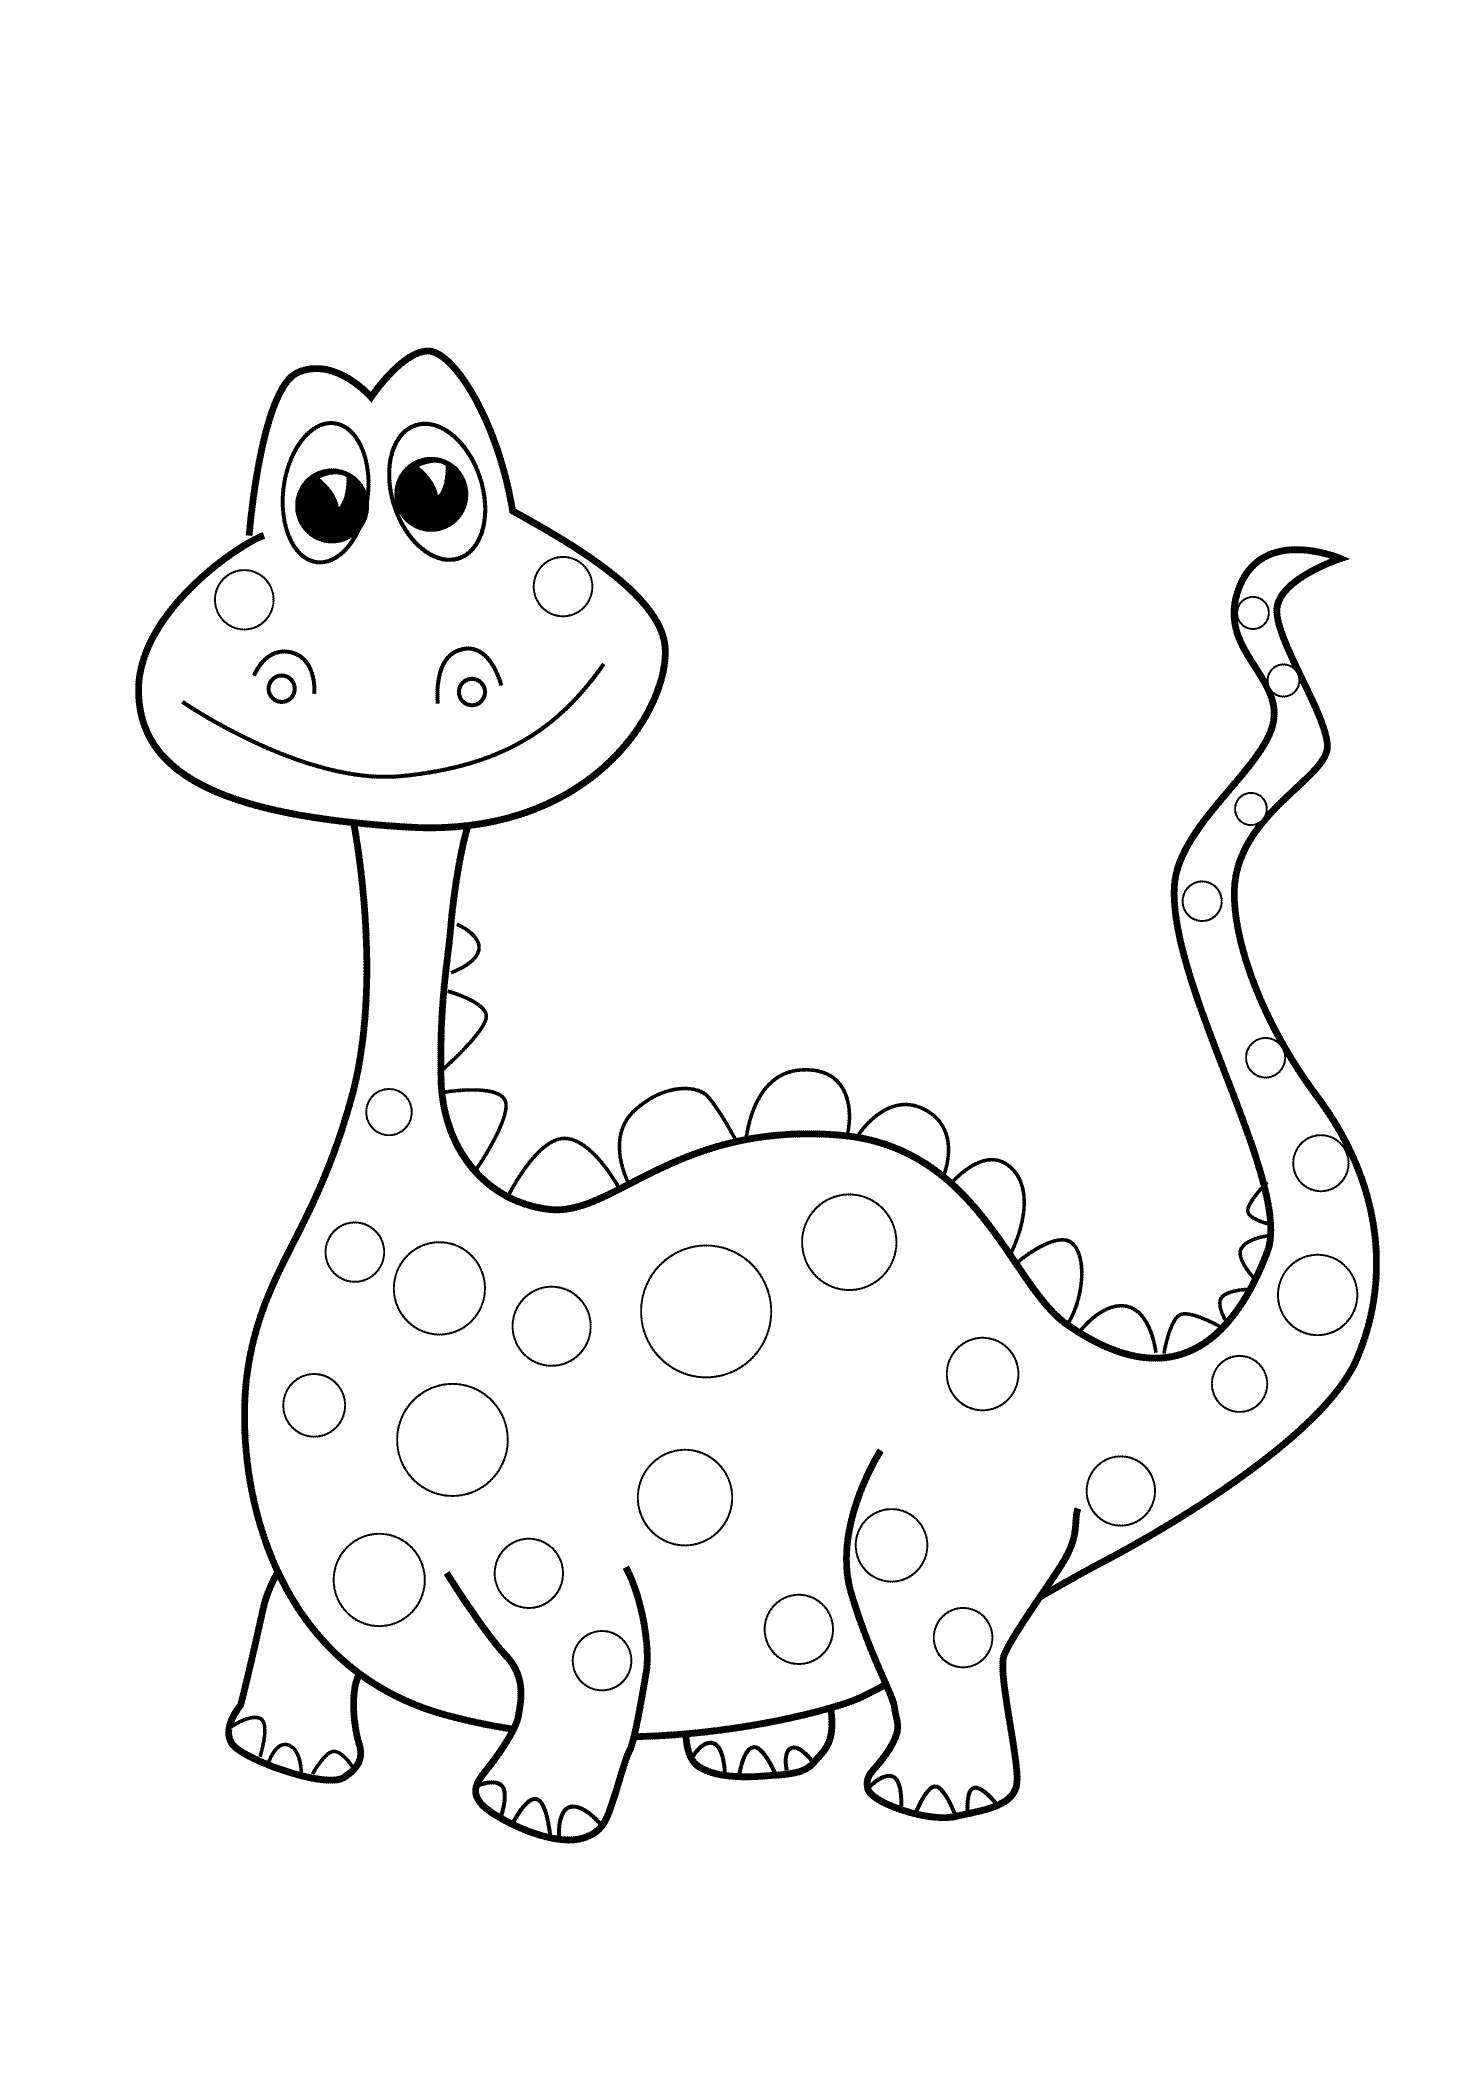 Coloring Pages : Free Printable Coloring Pages For Preschoolers - Free Printable Pages For Preschoolers